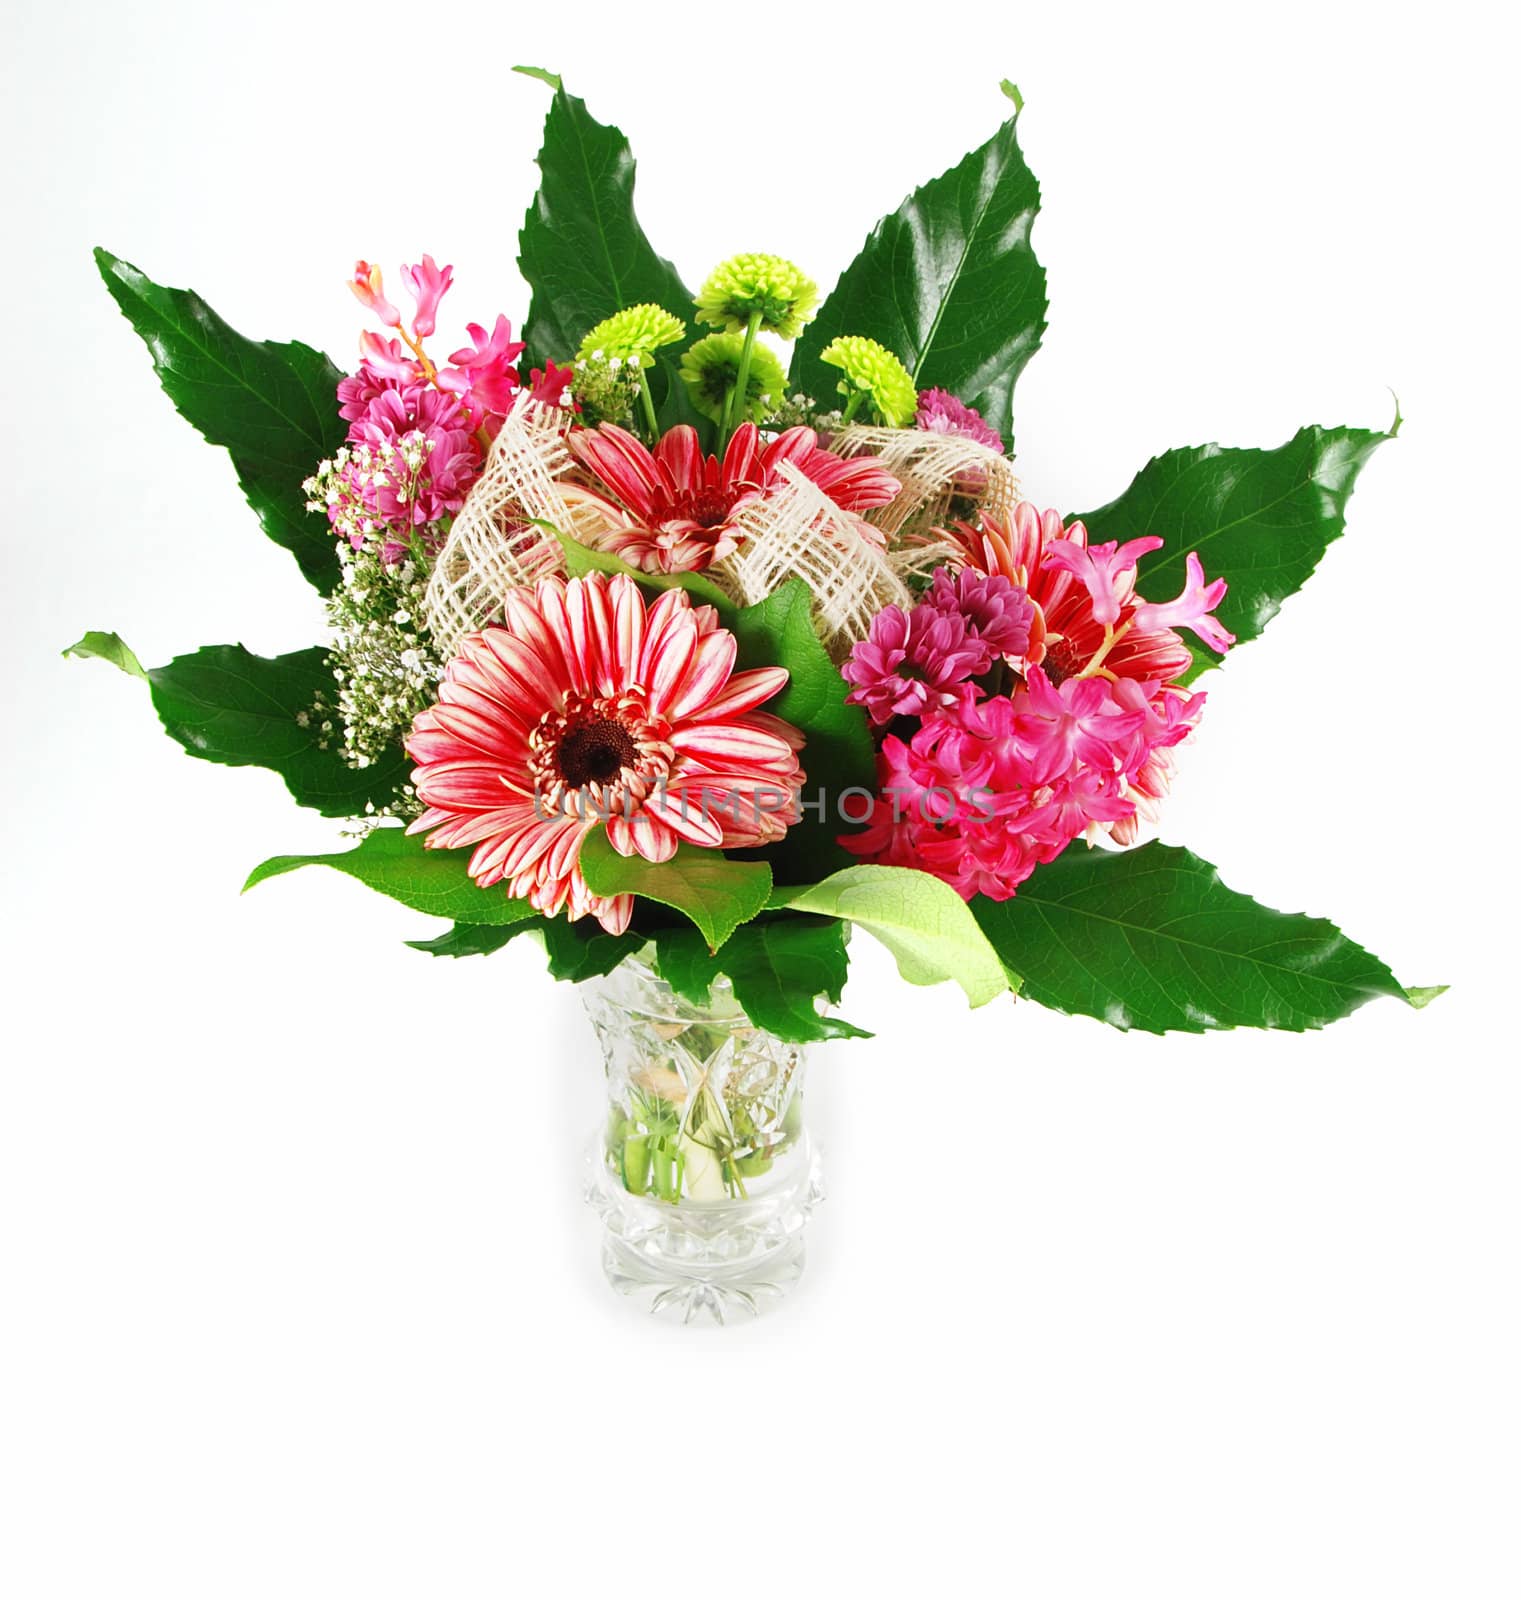 Beautiful bouquet of fresh vibrant gerbera flowers arranged in a green leaf and glass vase - isolated